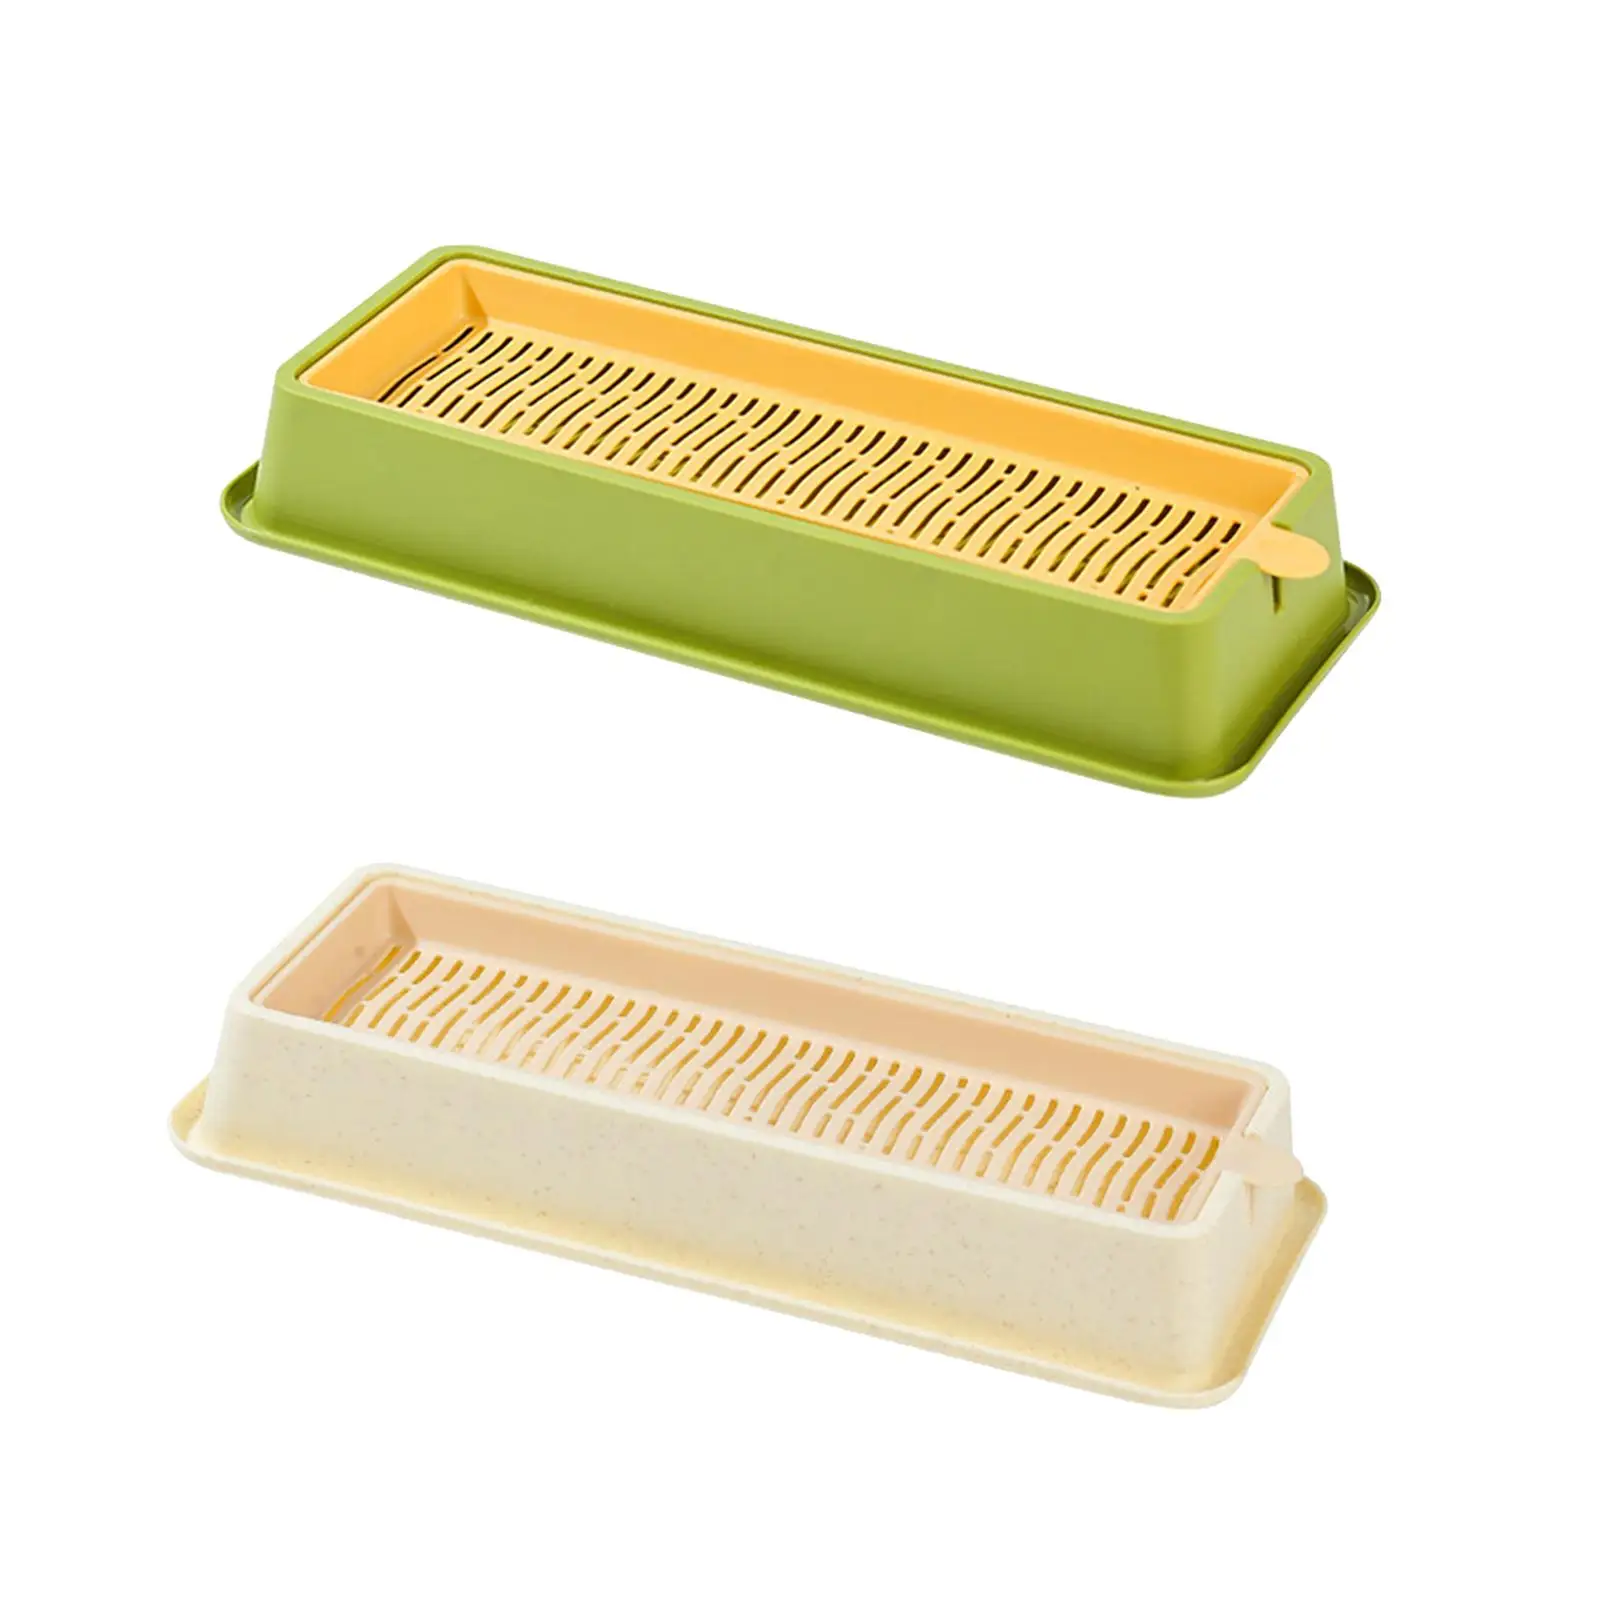 Seed Sprouter Tray Hydroponic Cat Grass Box Catnip Cultivation Box Grass Sprouting Tray for Home Garden Office Microgreens